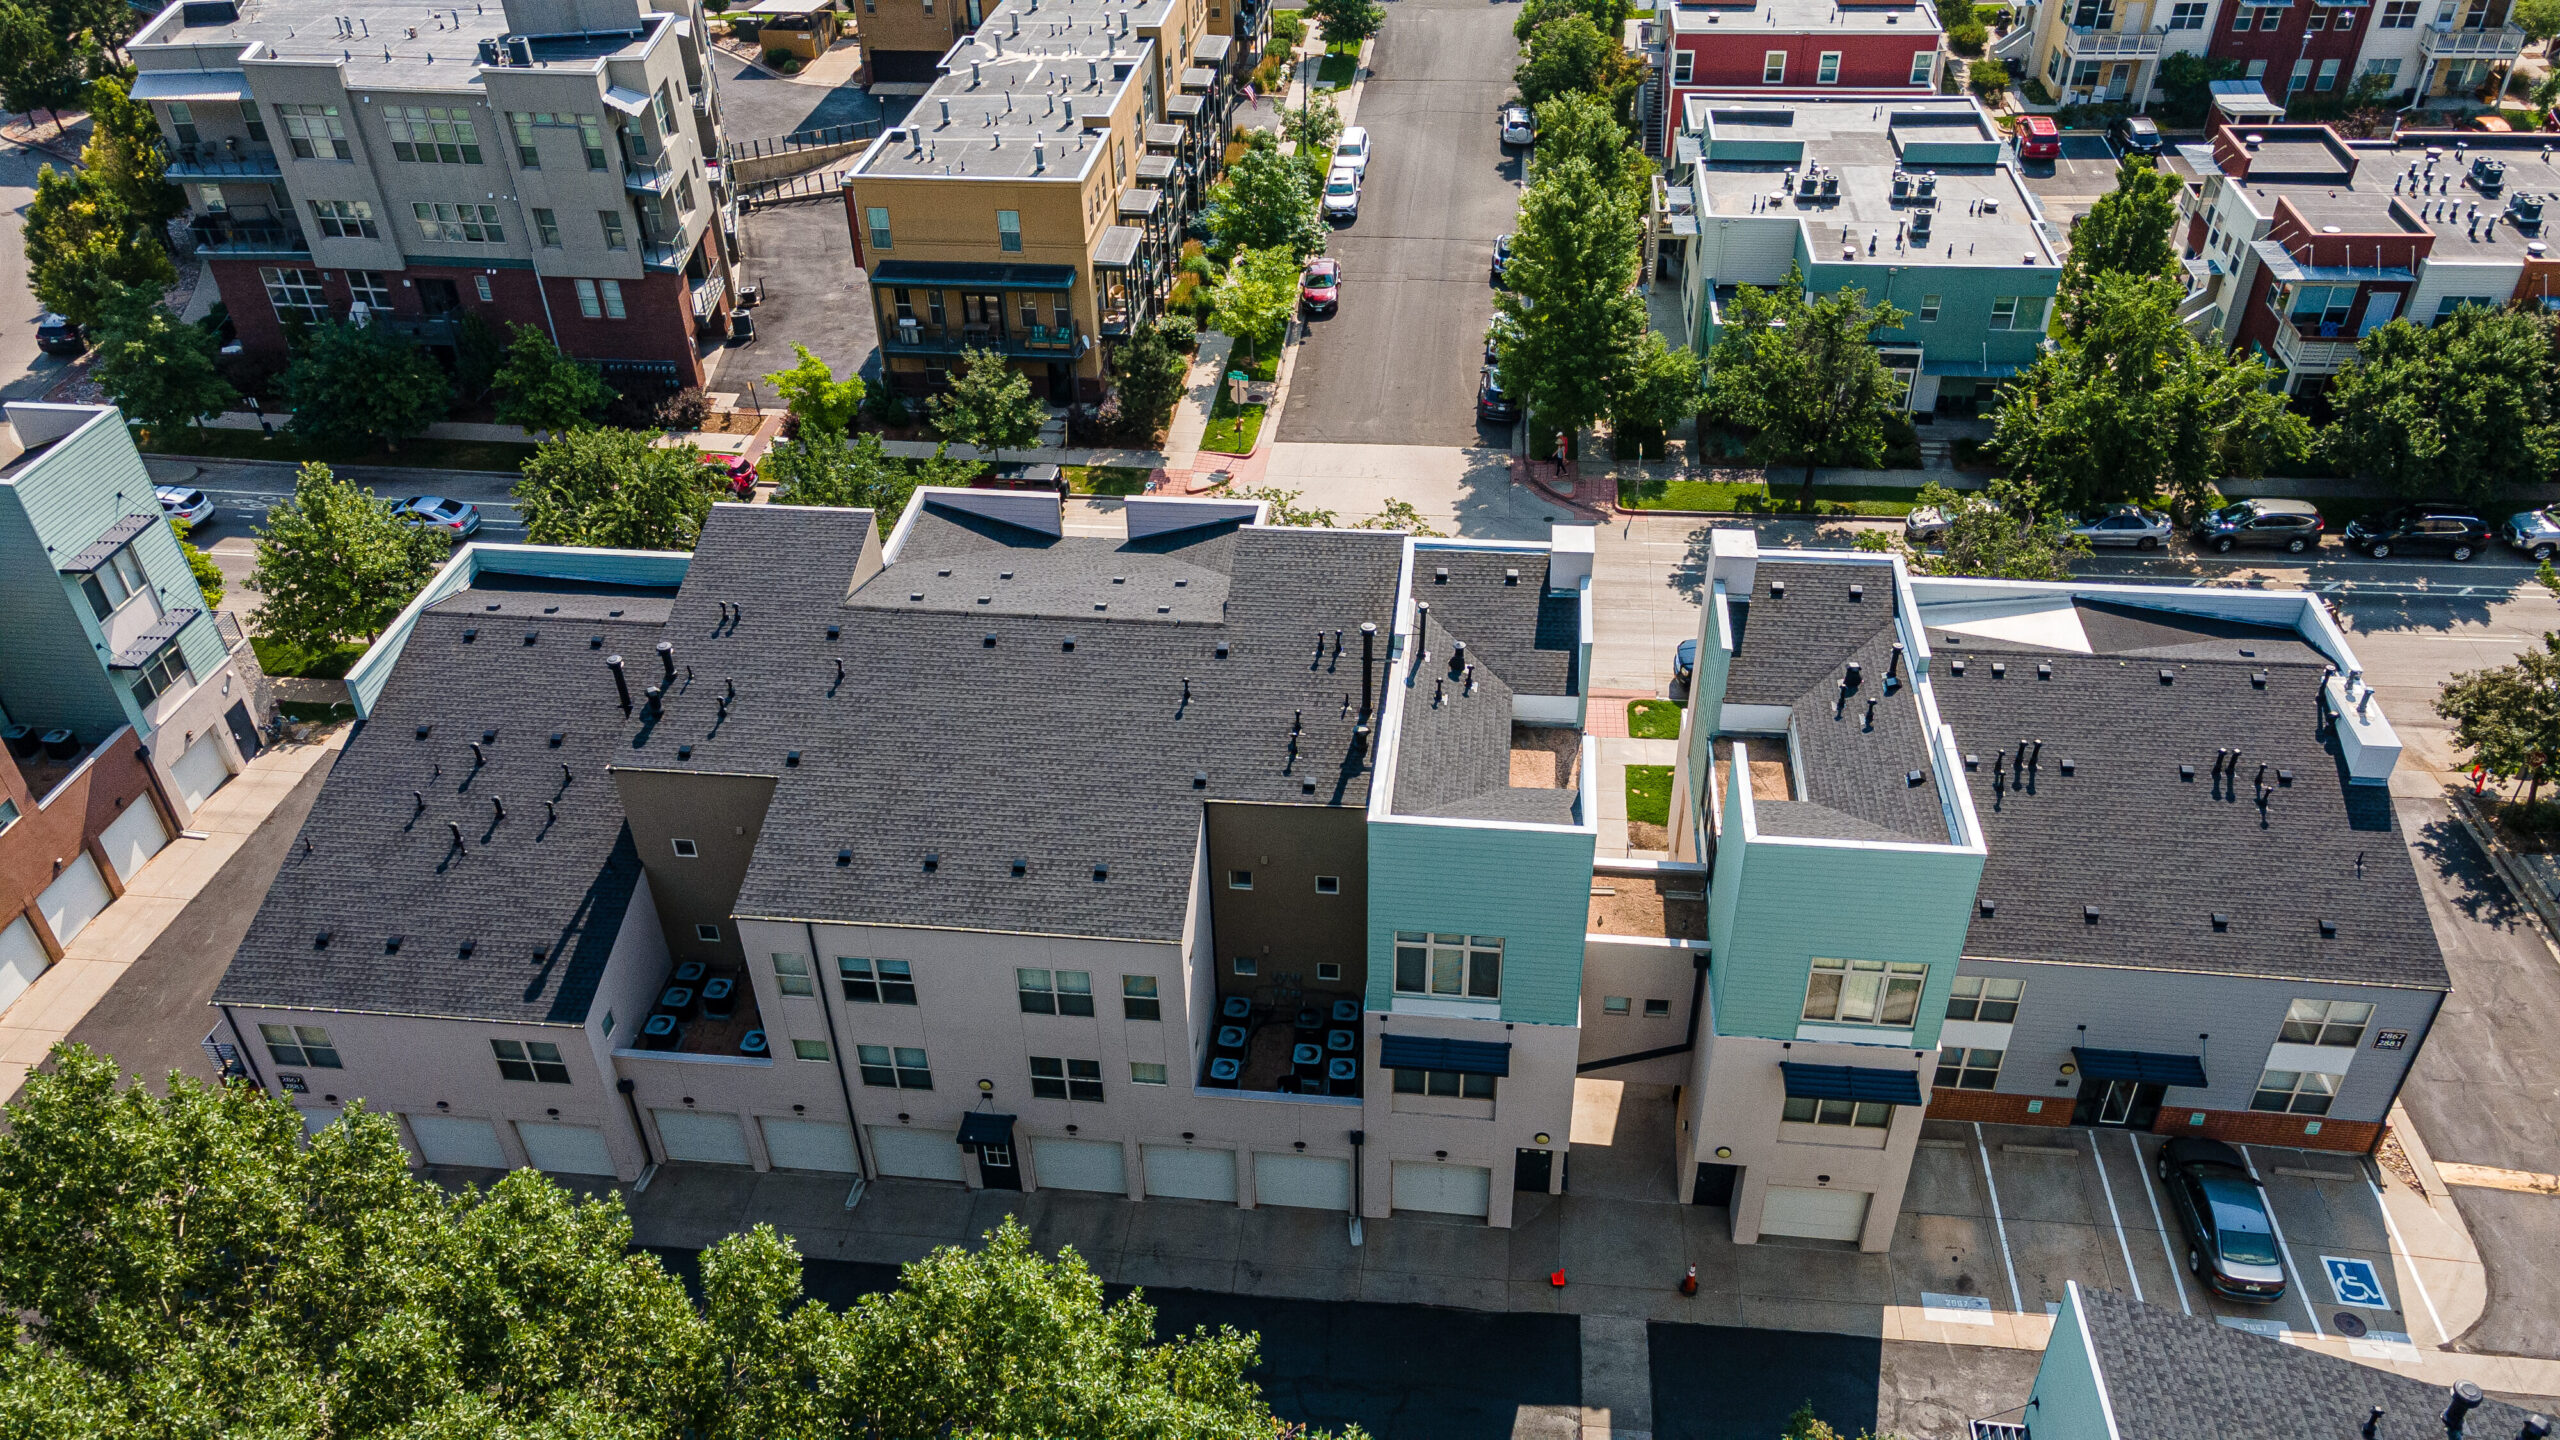 Overhead shot of apartment building with green accent walls